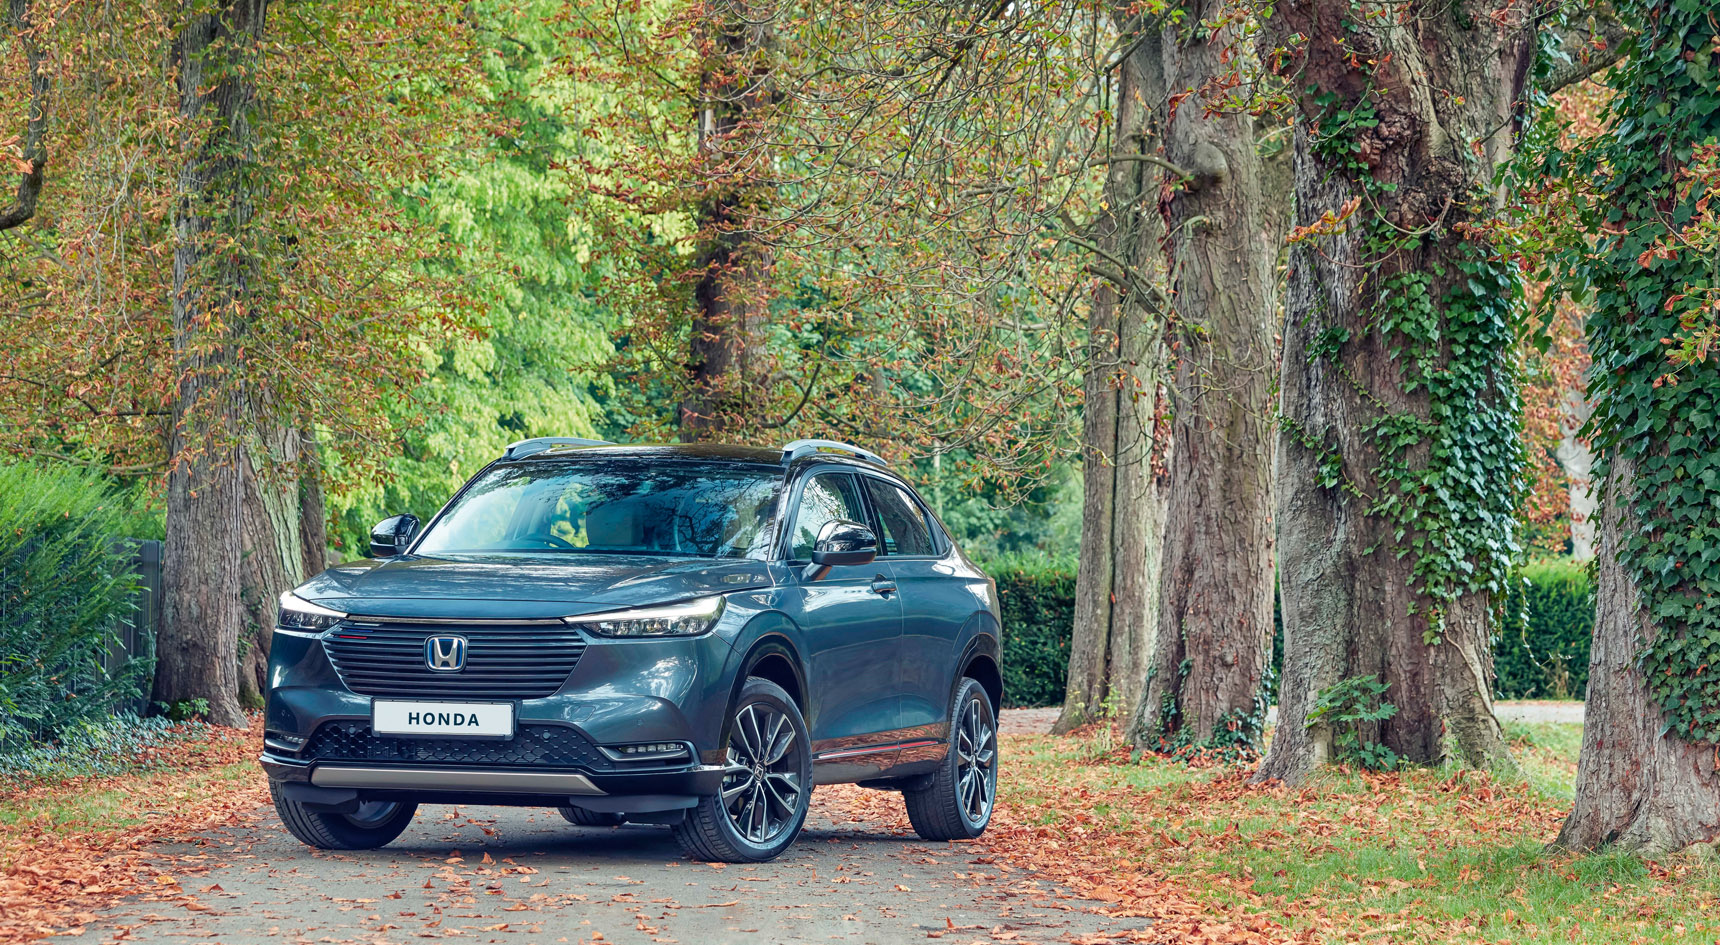 The Honda HR-V parked on the road among trees.